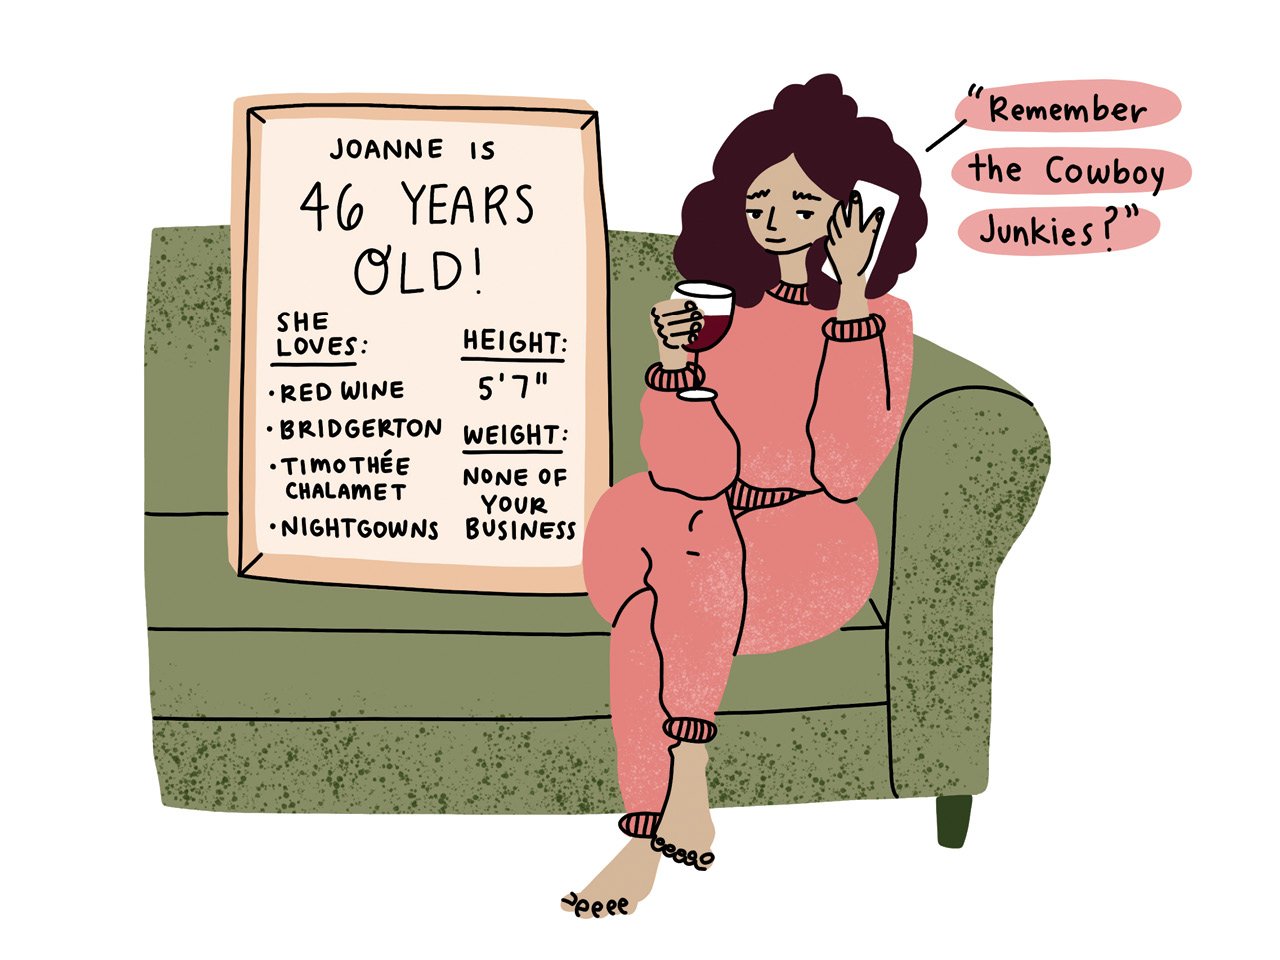 An illustration of a woman on a couch, talking on the phone